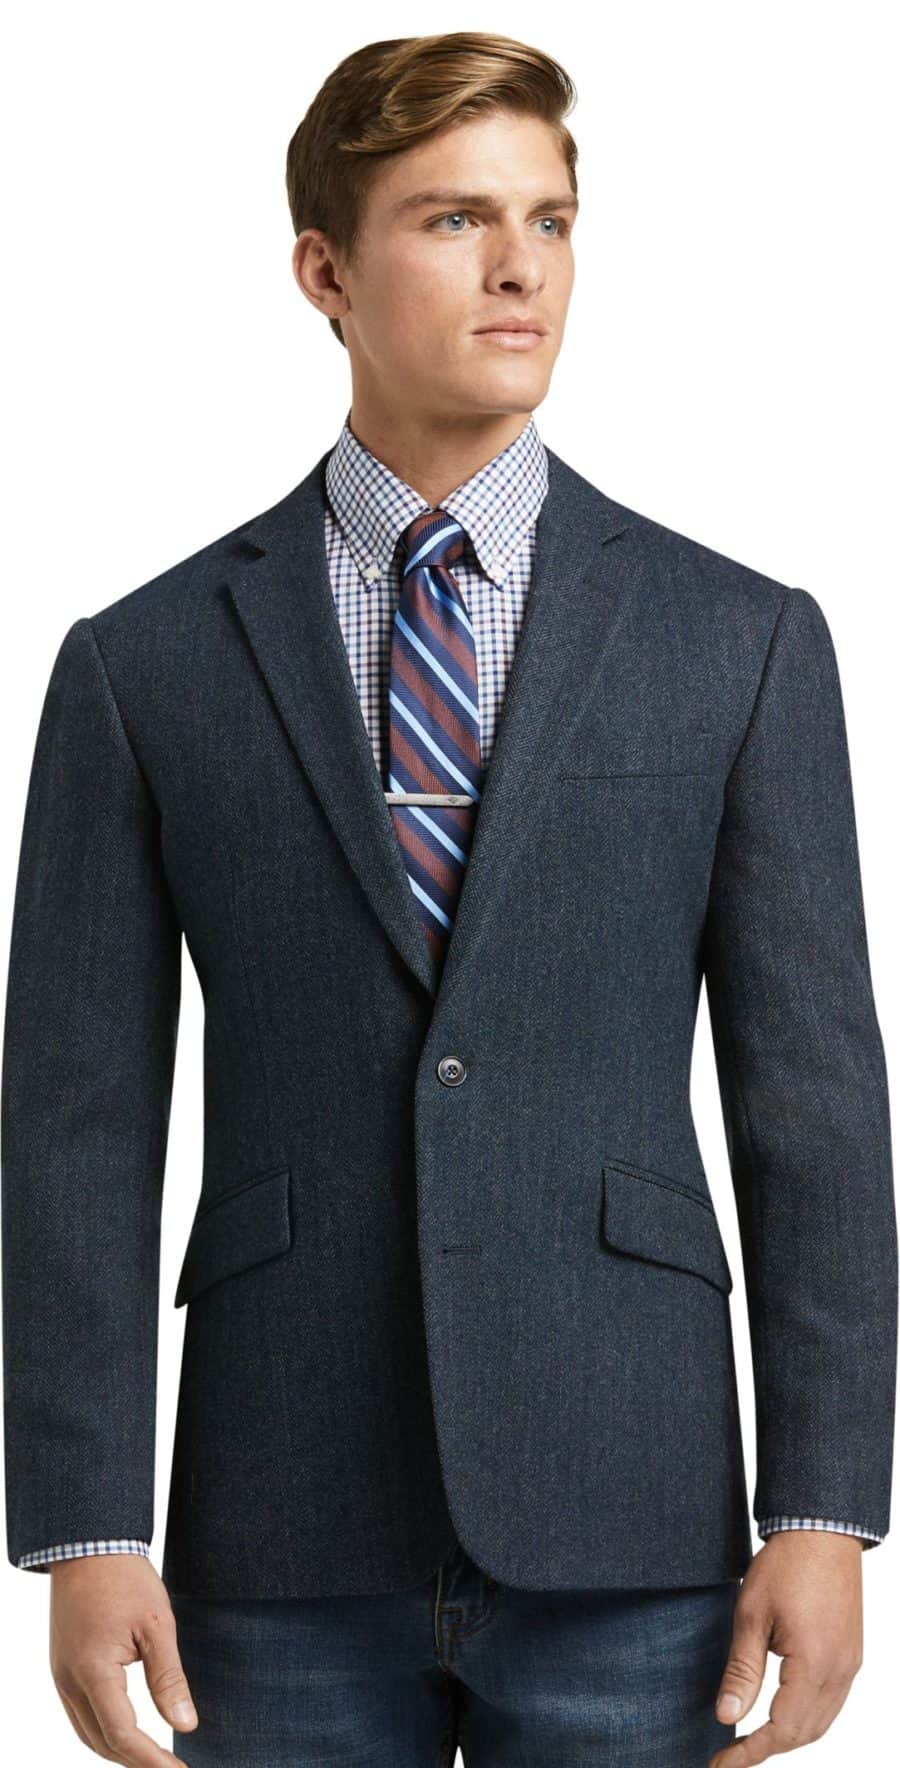 The Tweed Jacket: The Essential Cool-Weather Sport Coat | Primer